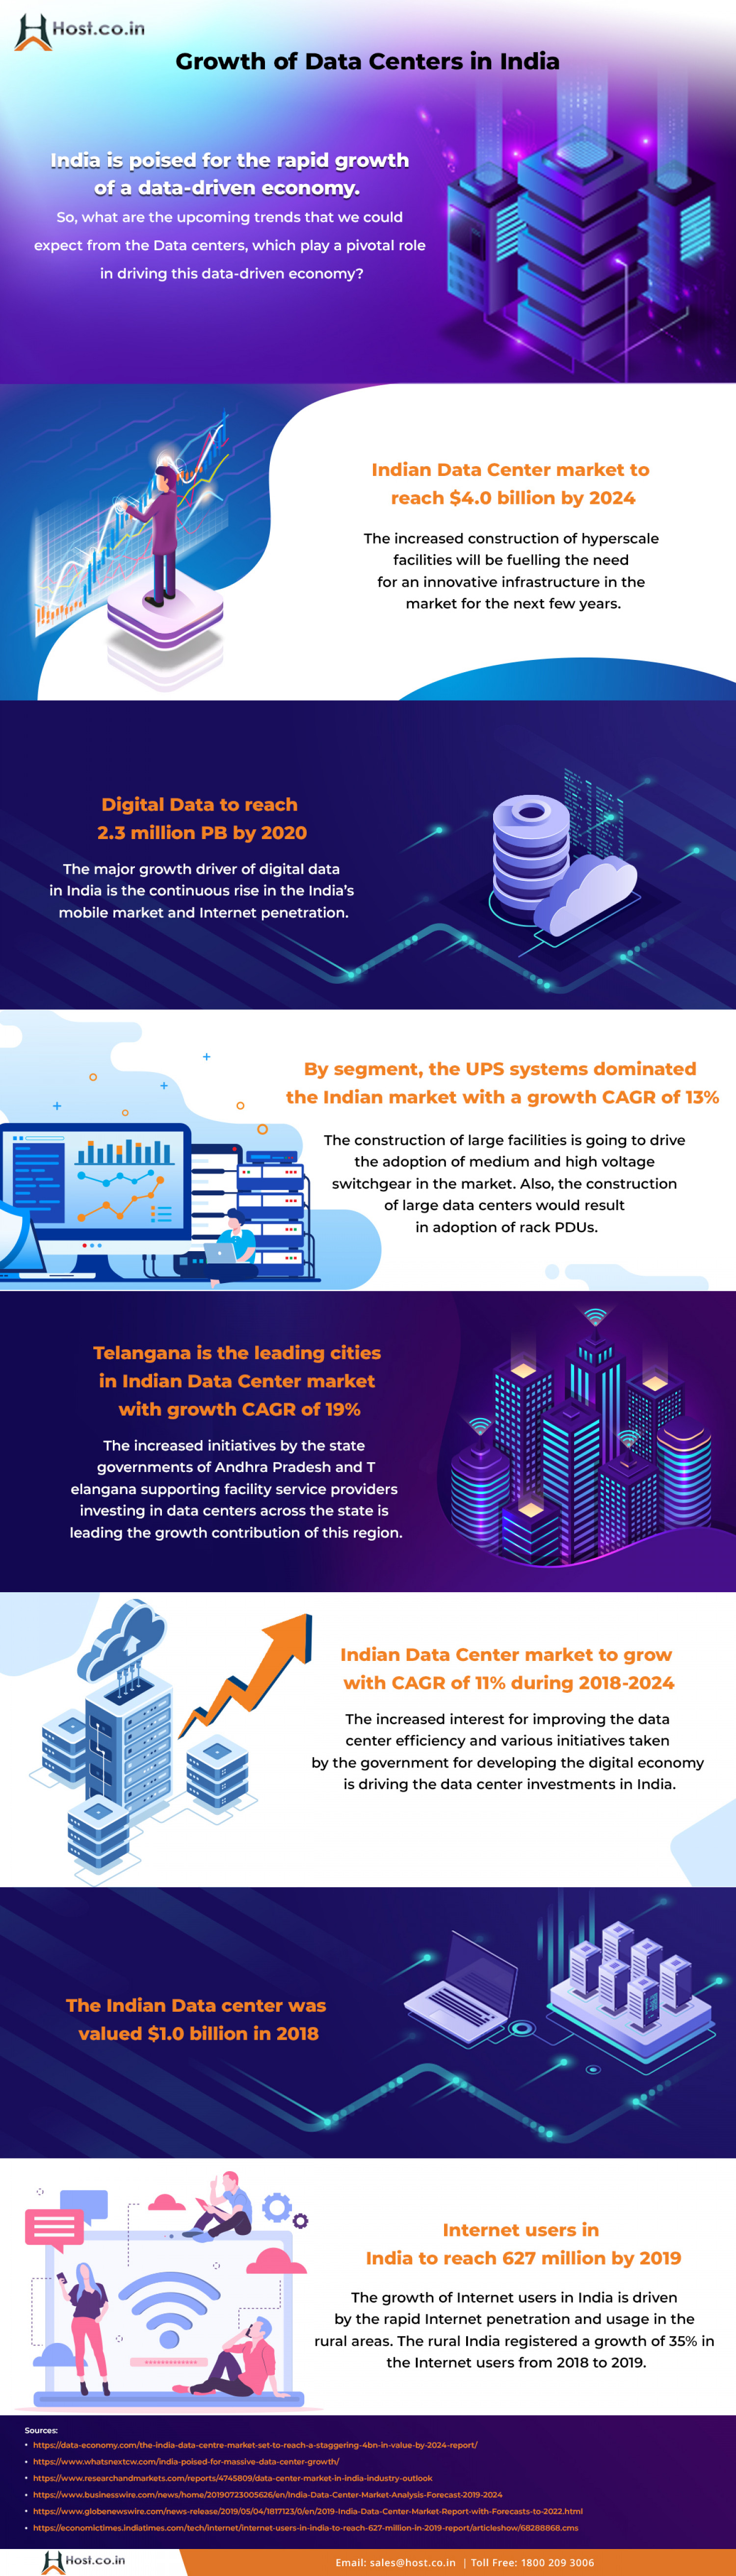 Growth Of Data Centers in India Infographic